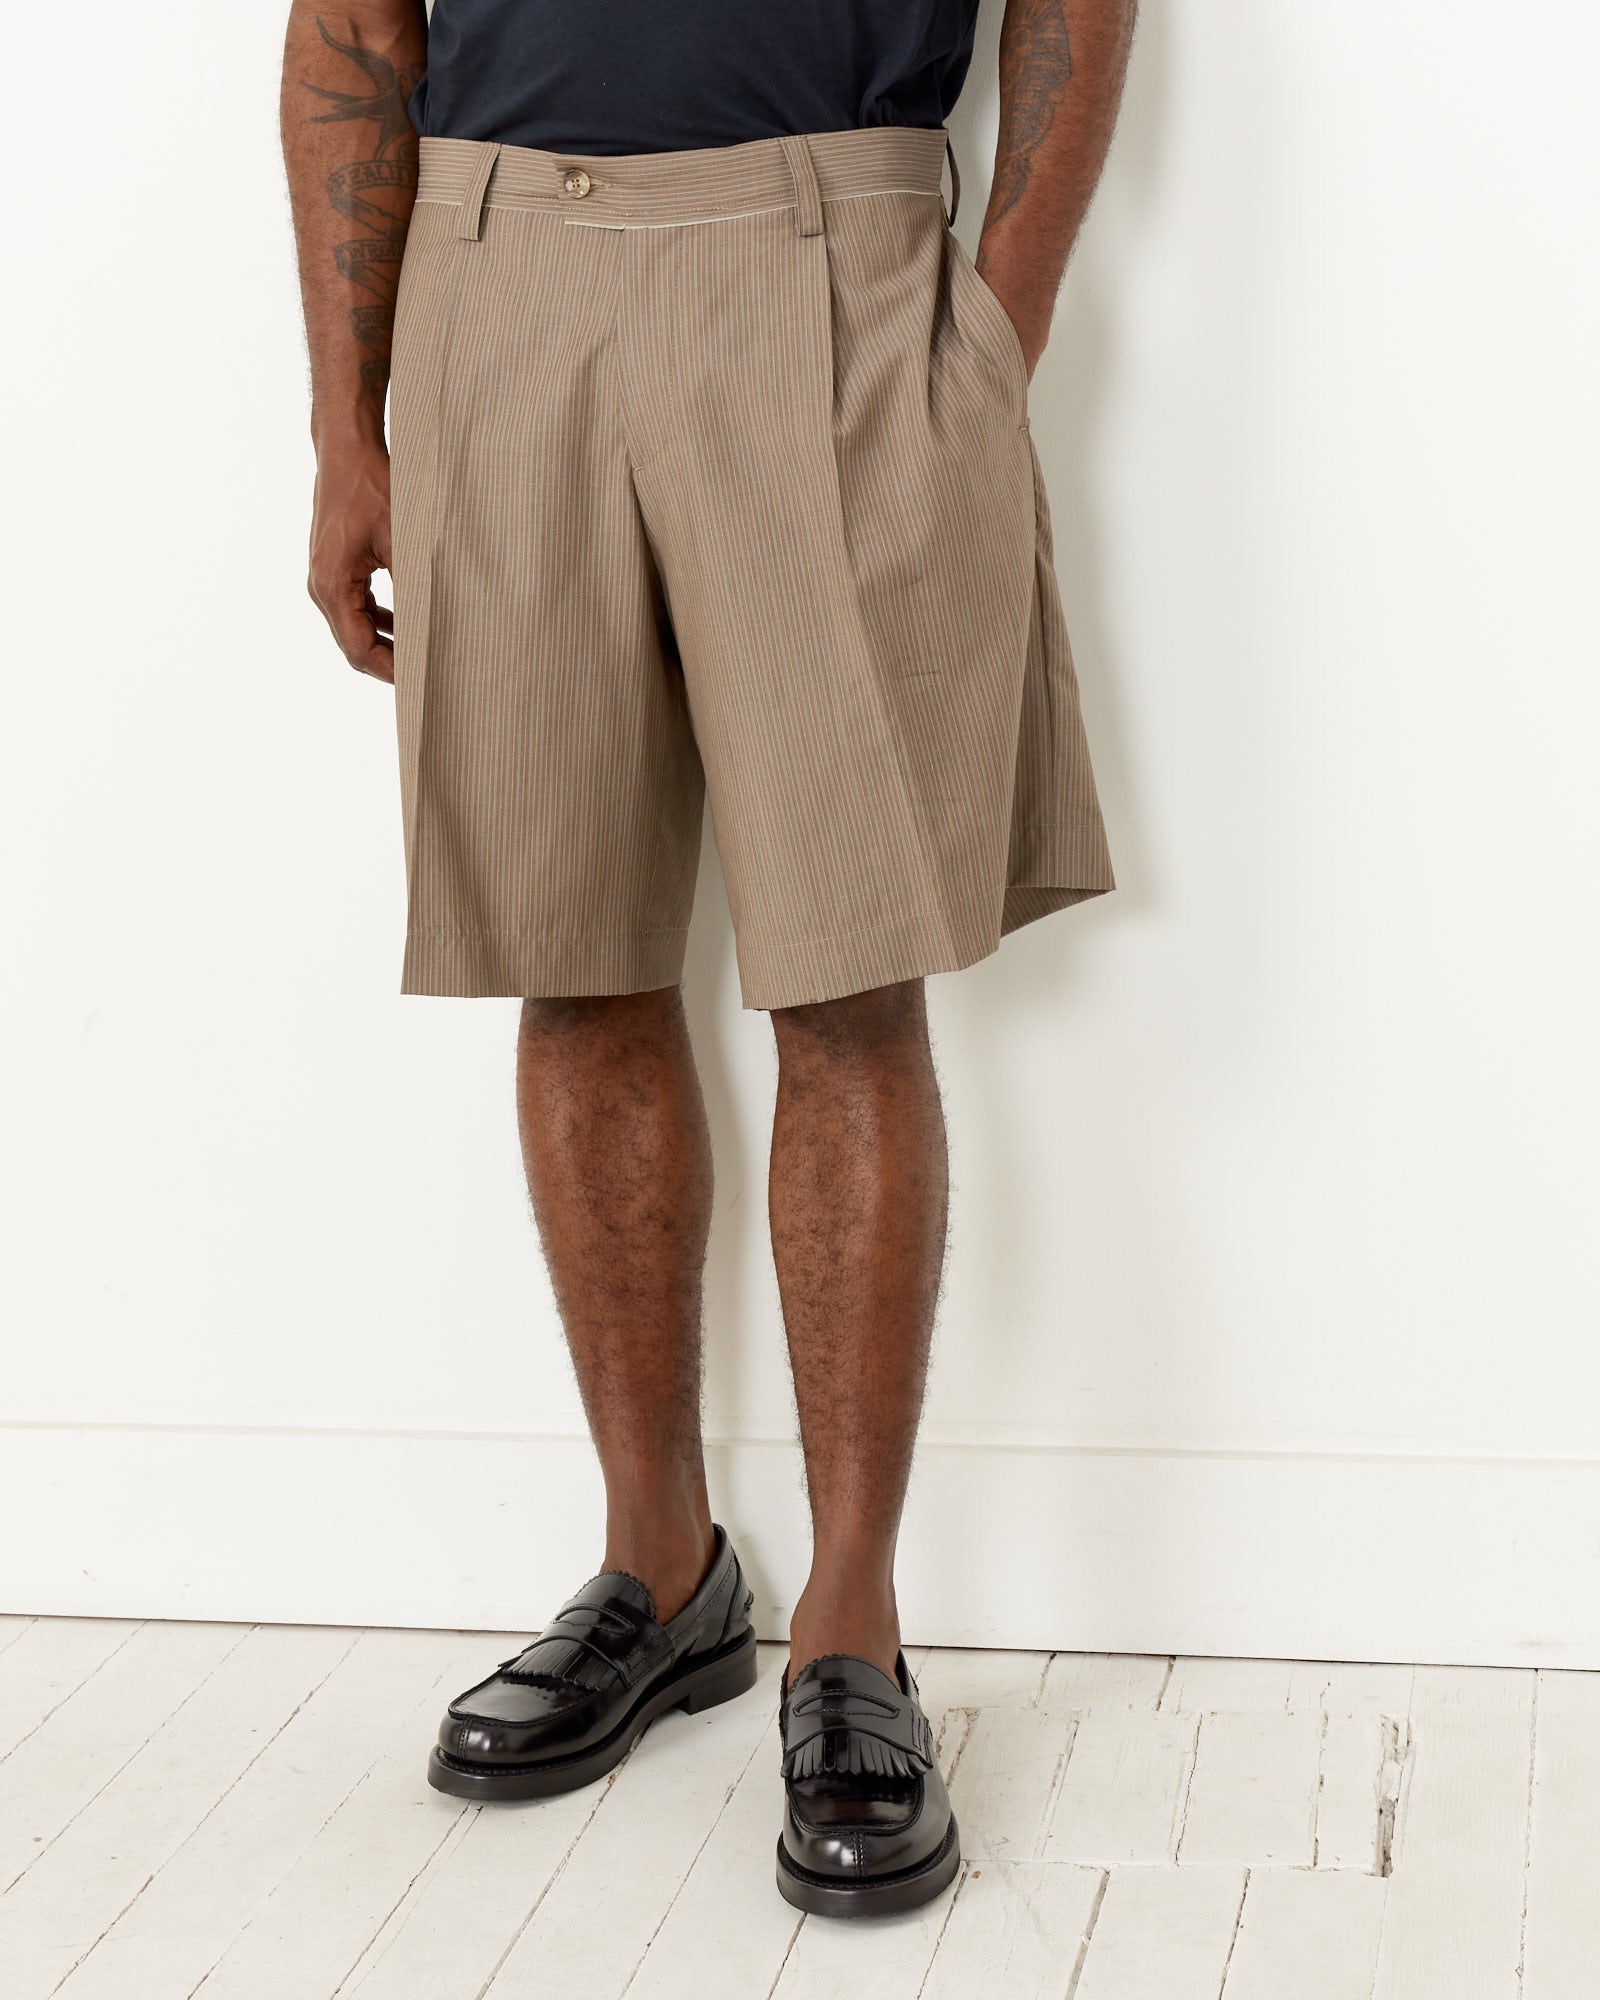 Classic Shorts in Taupe Grey